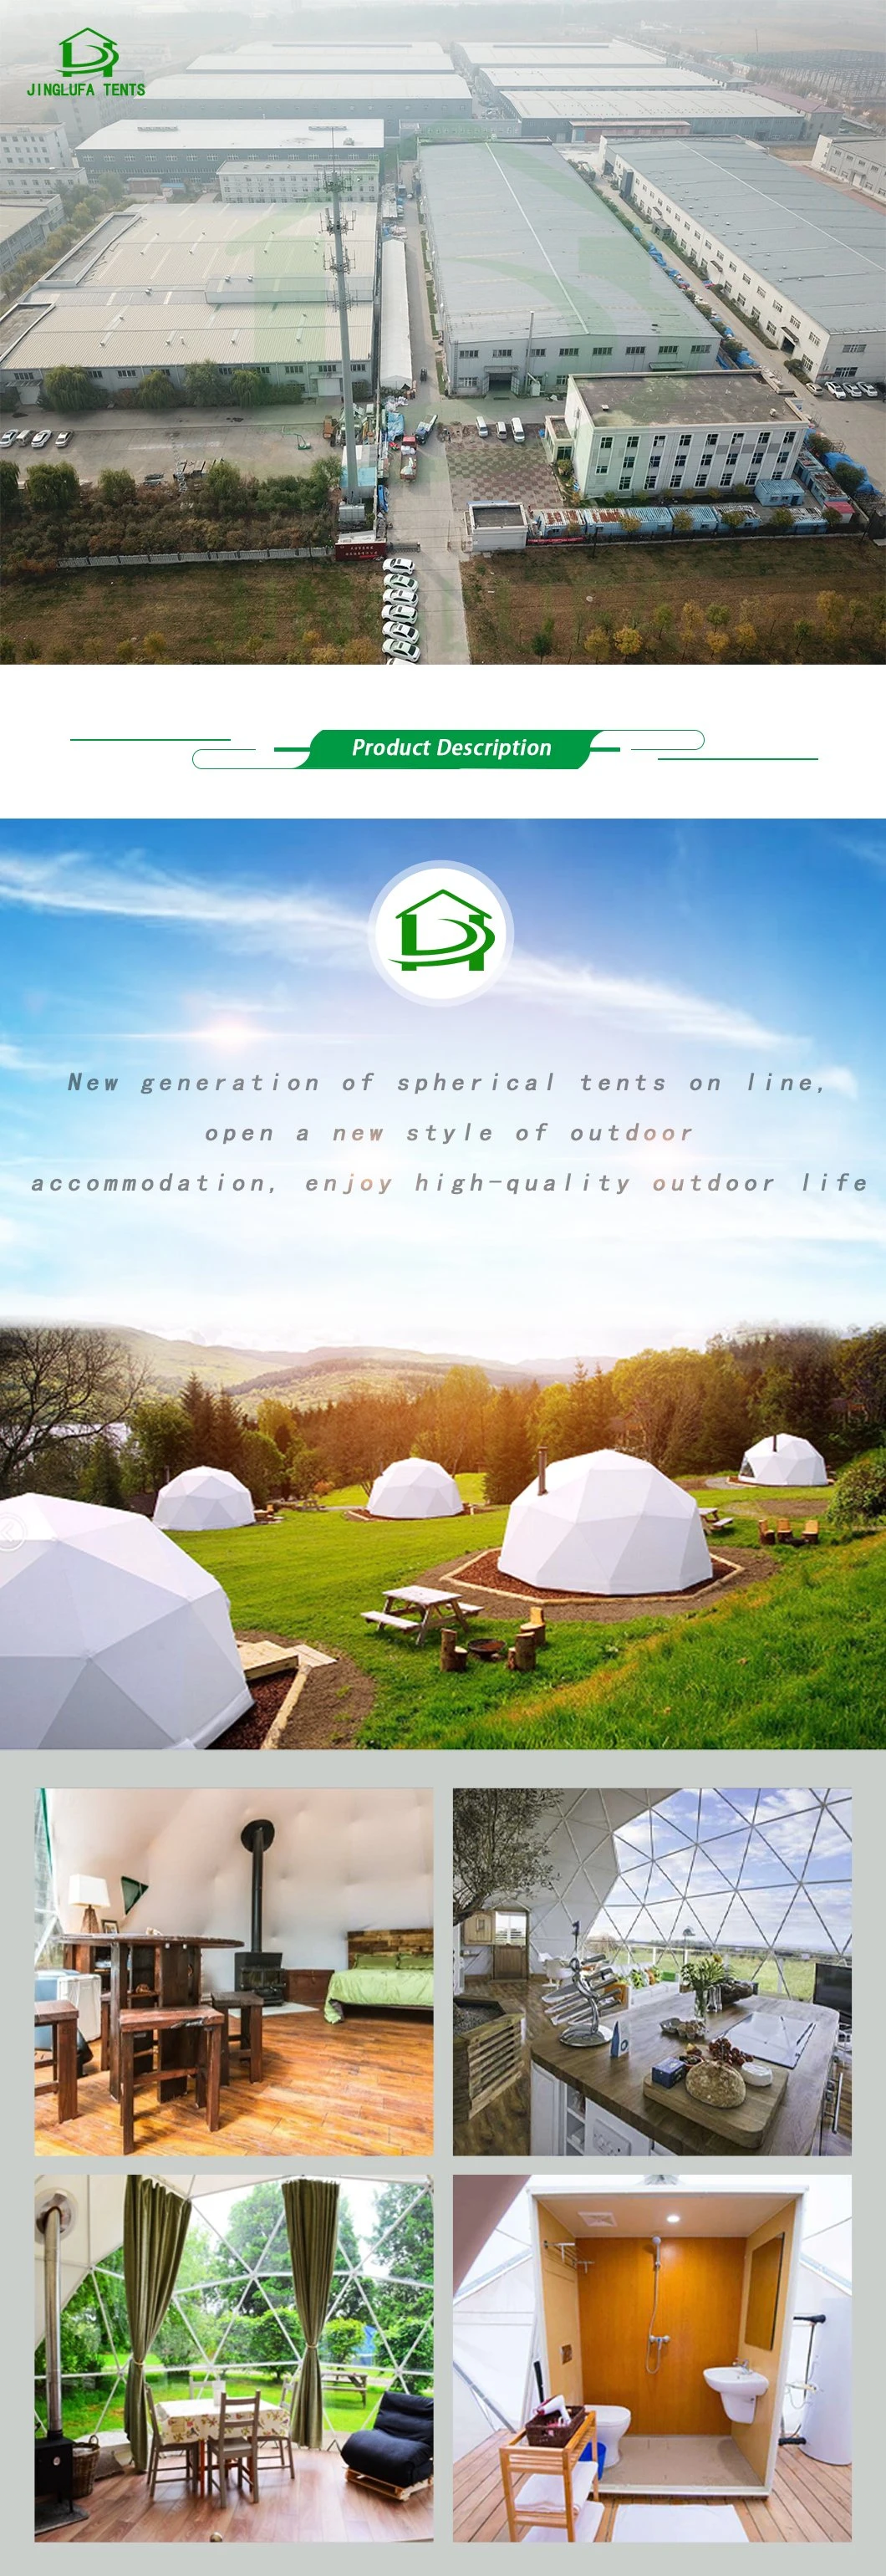 Waterproof PVC Dome Tent Luxury Geodesic Dome Tent Hotel